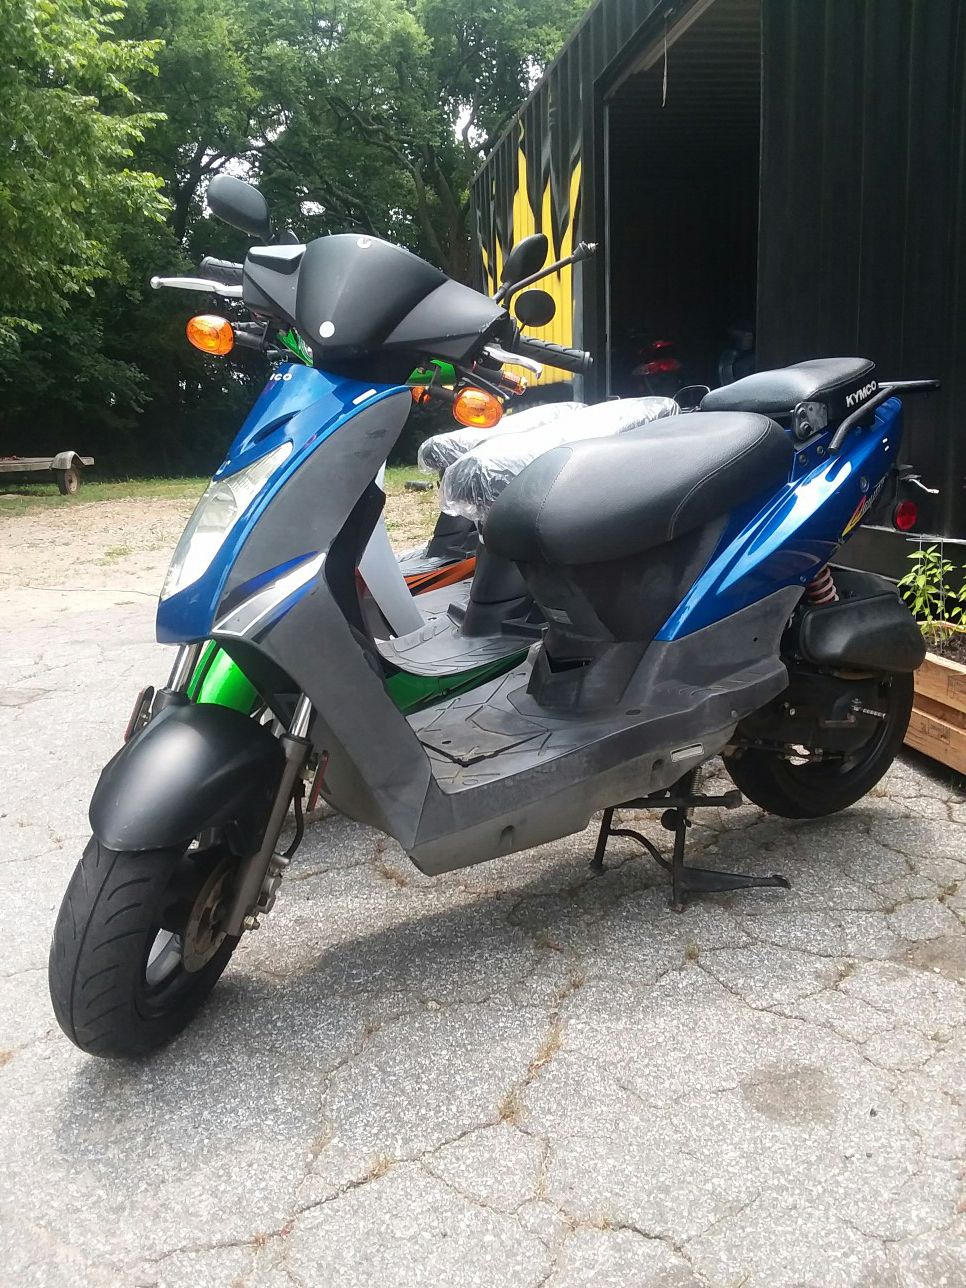 49cc moped scooter Kymco!